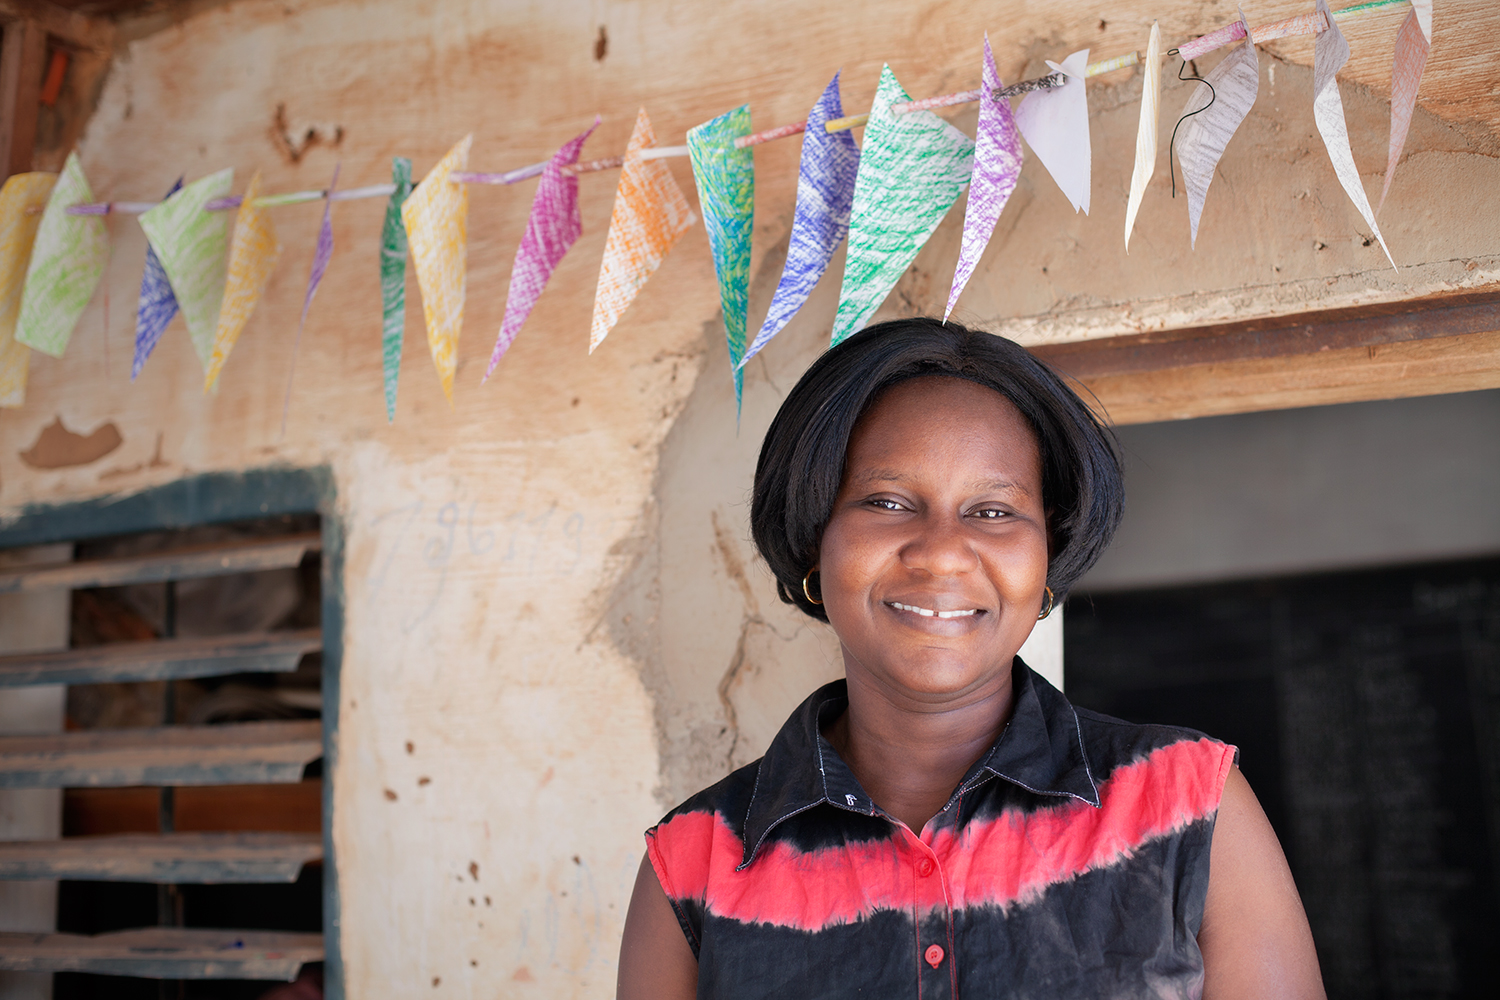 Martine Kabore works at the Pan Bila shelter for young girls who have experienced forced marriage, early pregnancy and sexual violence in Ouagadougou, Burkina Faso.